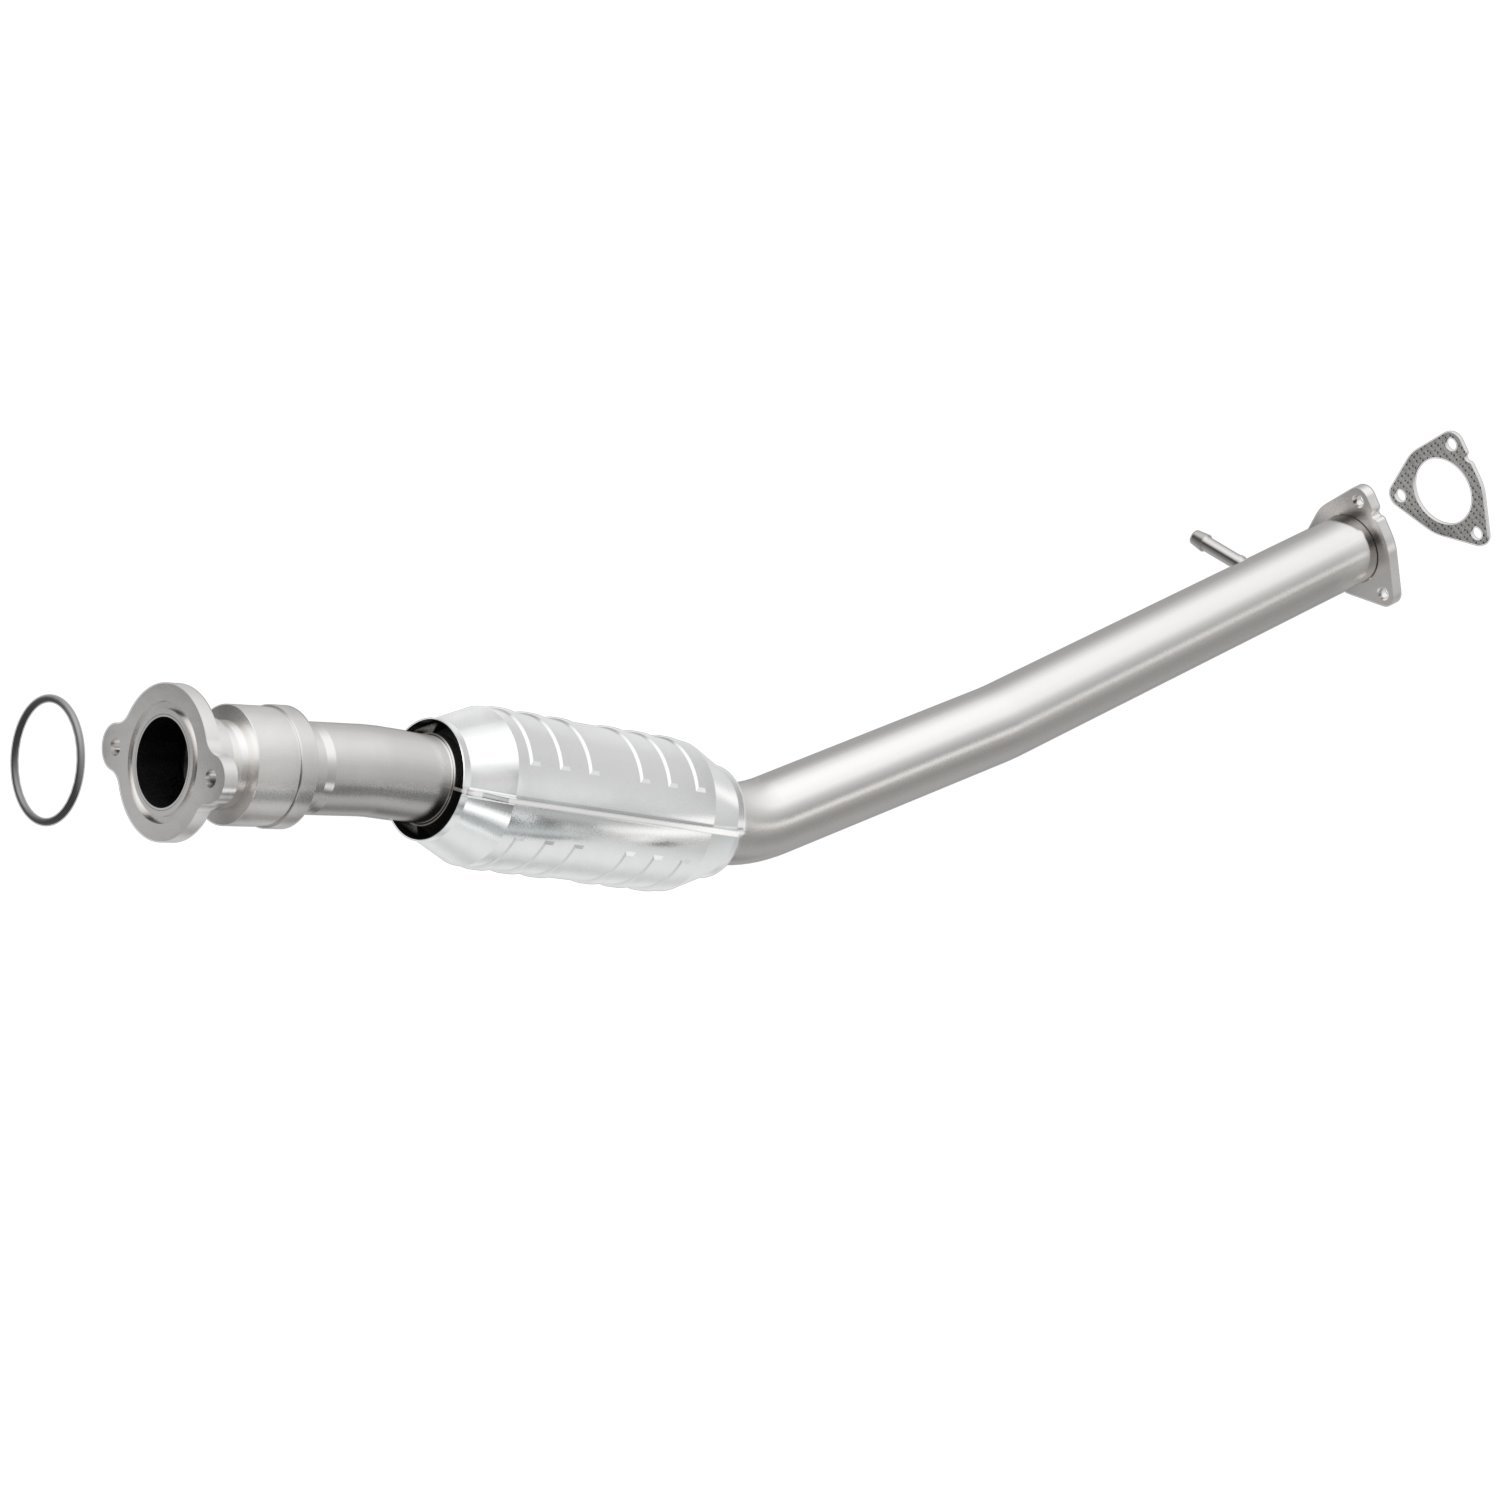 Direct-Fit Catalytic Converter 2005-06 Chevy Equinox 3.4L